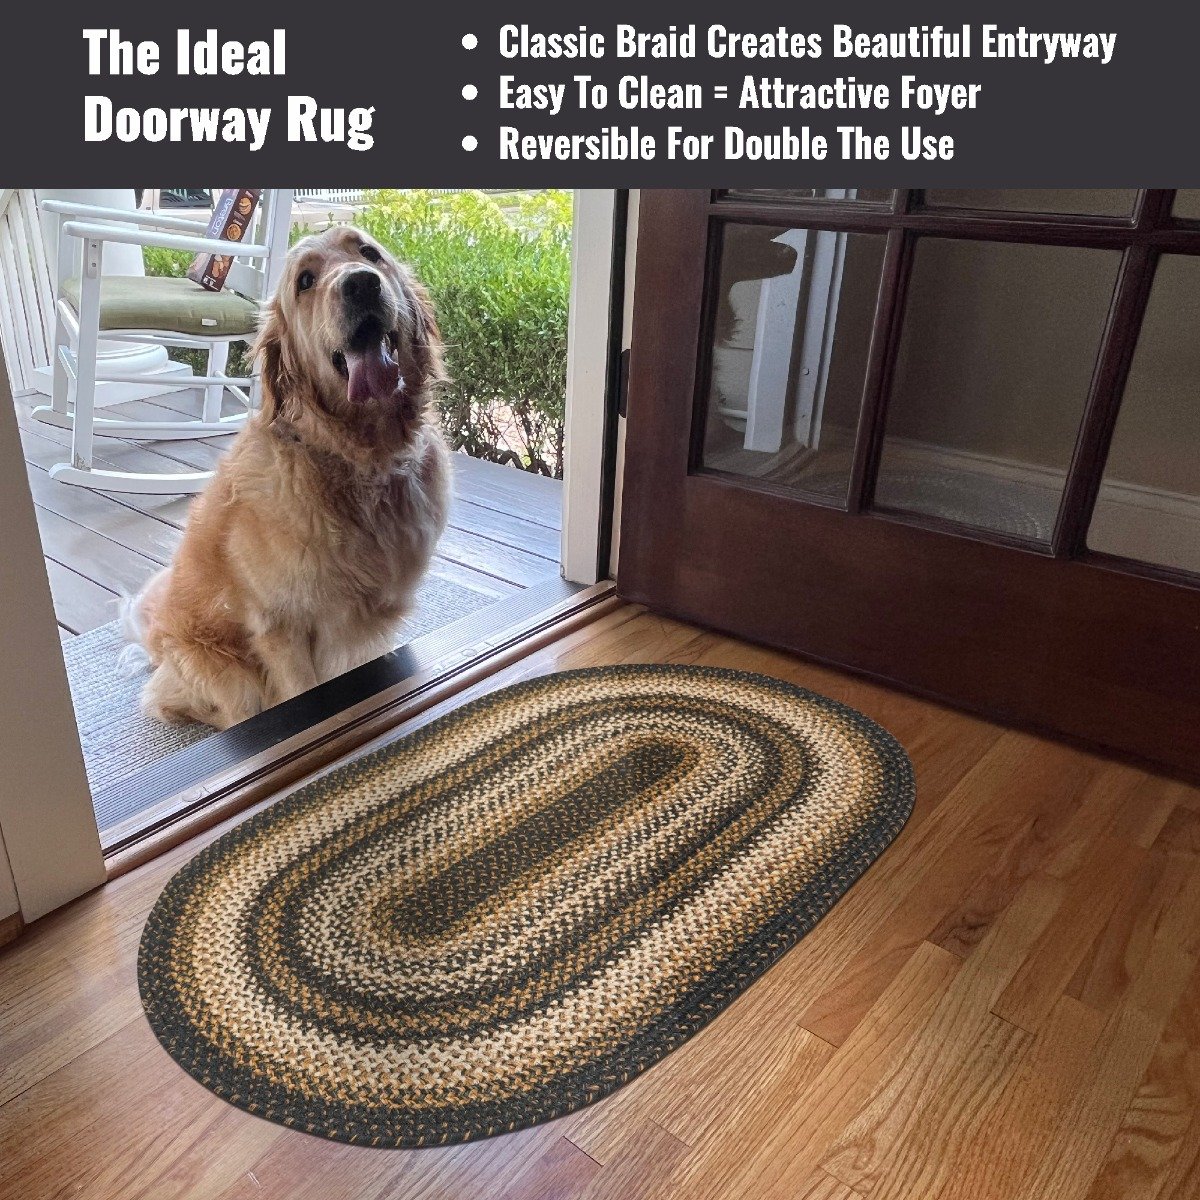 Homespice 2x3' Brown Oval Braided Rug. Harvest Brown Jute Oval Rug. Uses-  Entryway Rugs, Kitchen Rugs, Bathroom Rugs. Reversible, Rustic, Country,  Primitive, Farmhouse Decor Rug : : Home